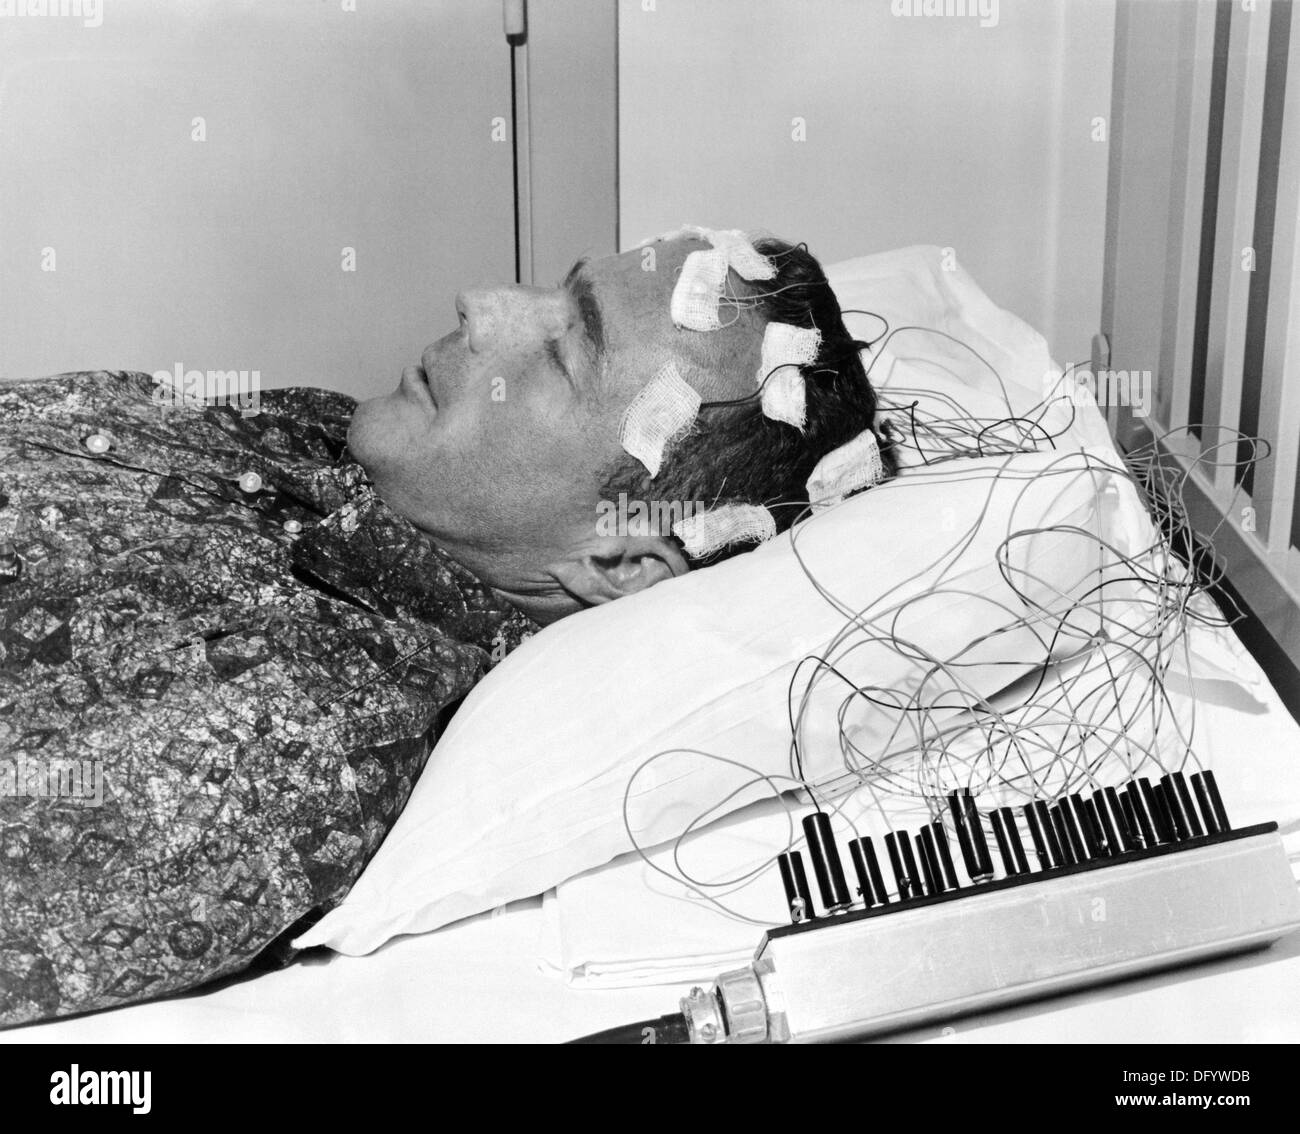 NASA Astronaut Scott Carpenter lies on a bed with biosensors attached to his head during astronaut training activities April 9, 1962 in Cape Canaveral, FL. Carpenter one of the original Mercury Seven astronauts and the second American to orbit the Earth died October 10, 2013 at age 88. Stock Photo